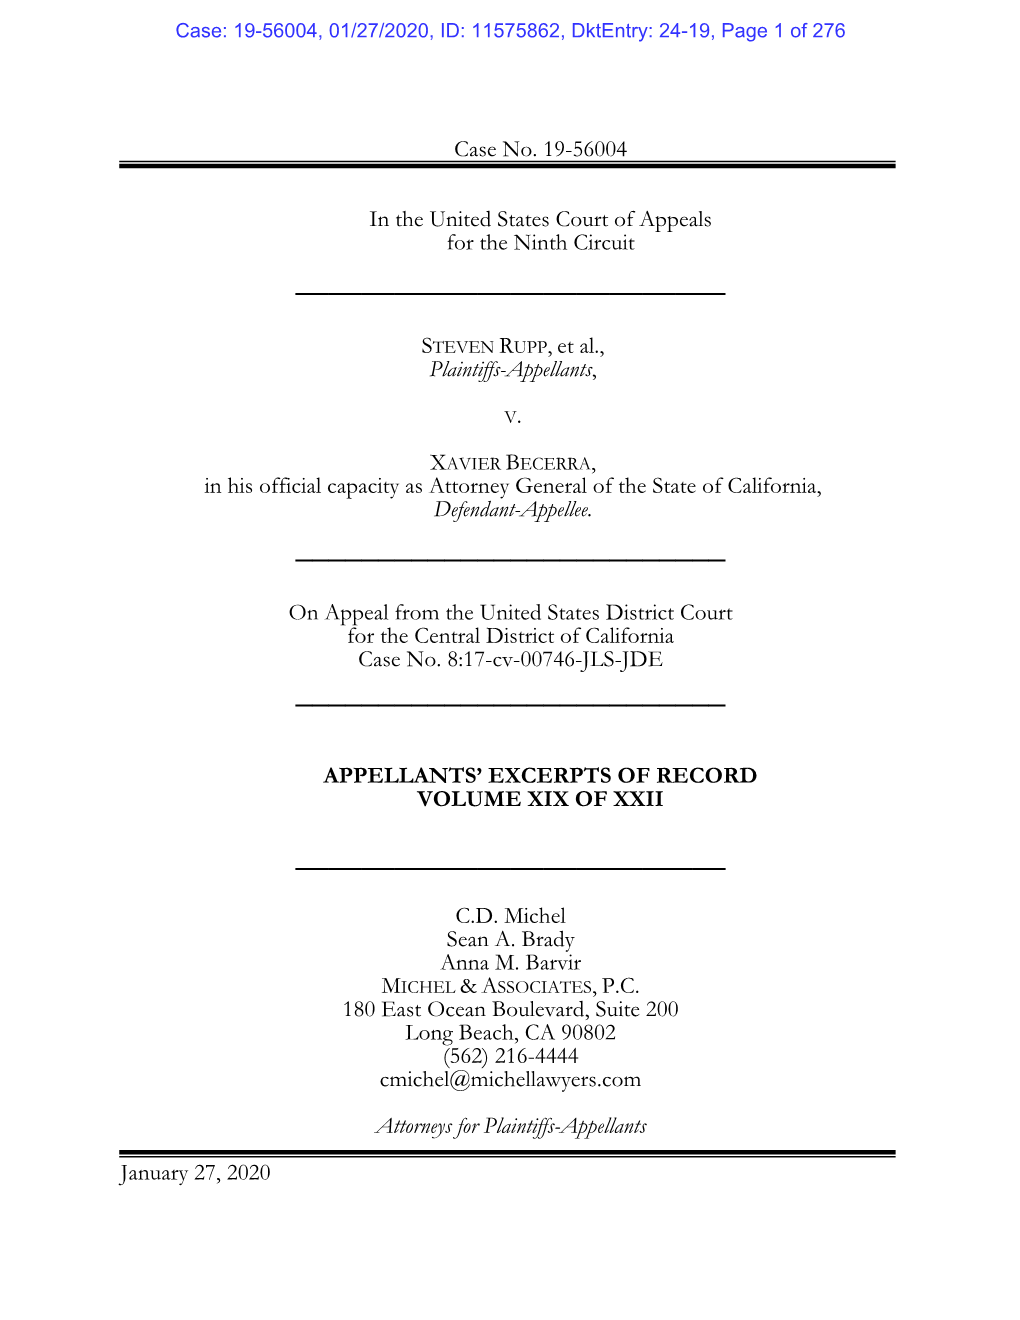 Case No. 19-56004 in the United States Court of Appeals for the Ninth Circuit